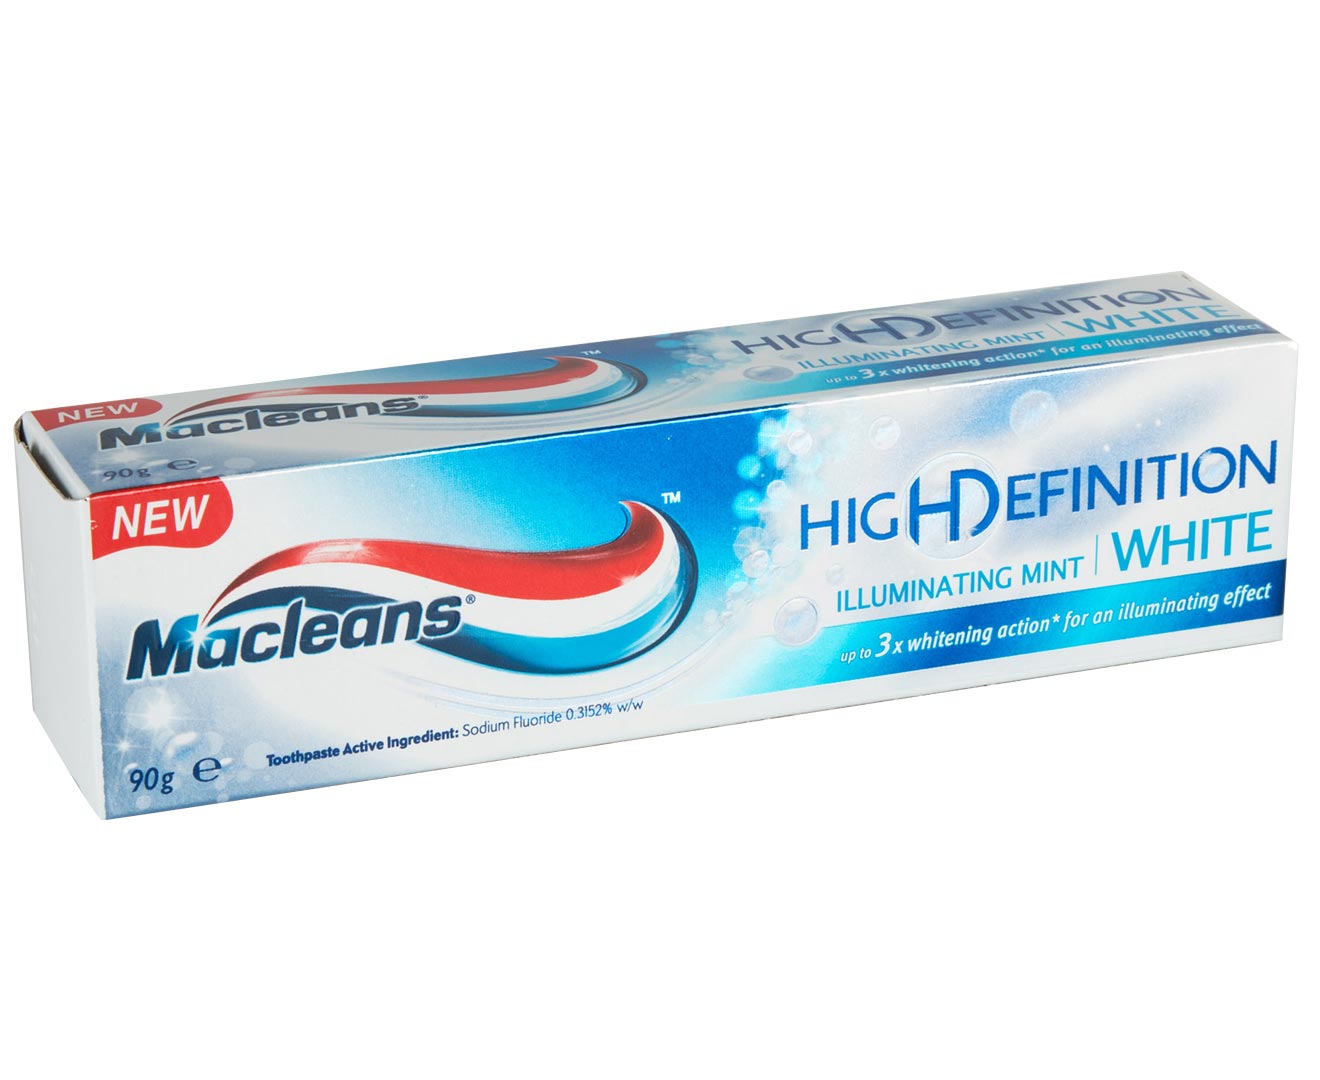 12 x Macleans High Definition White Toothpaste Illuminating White 90g ...